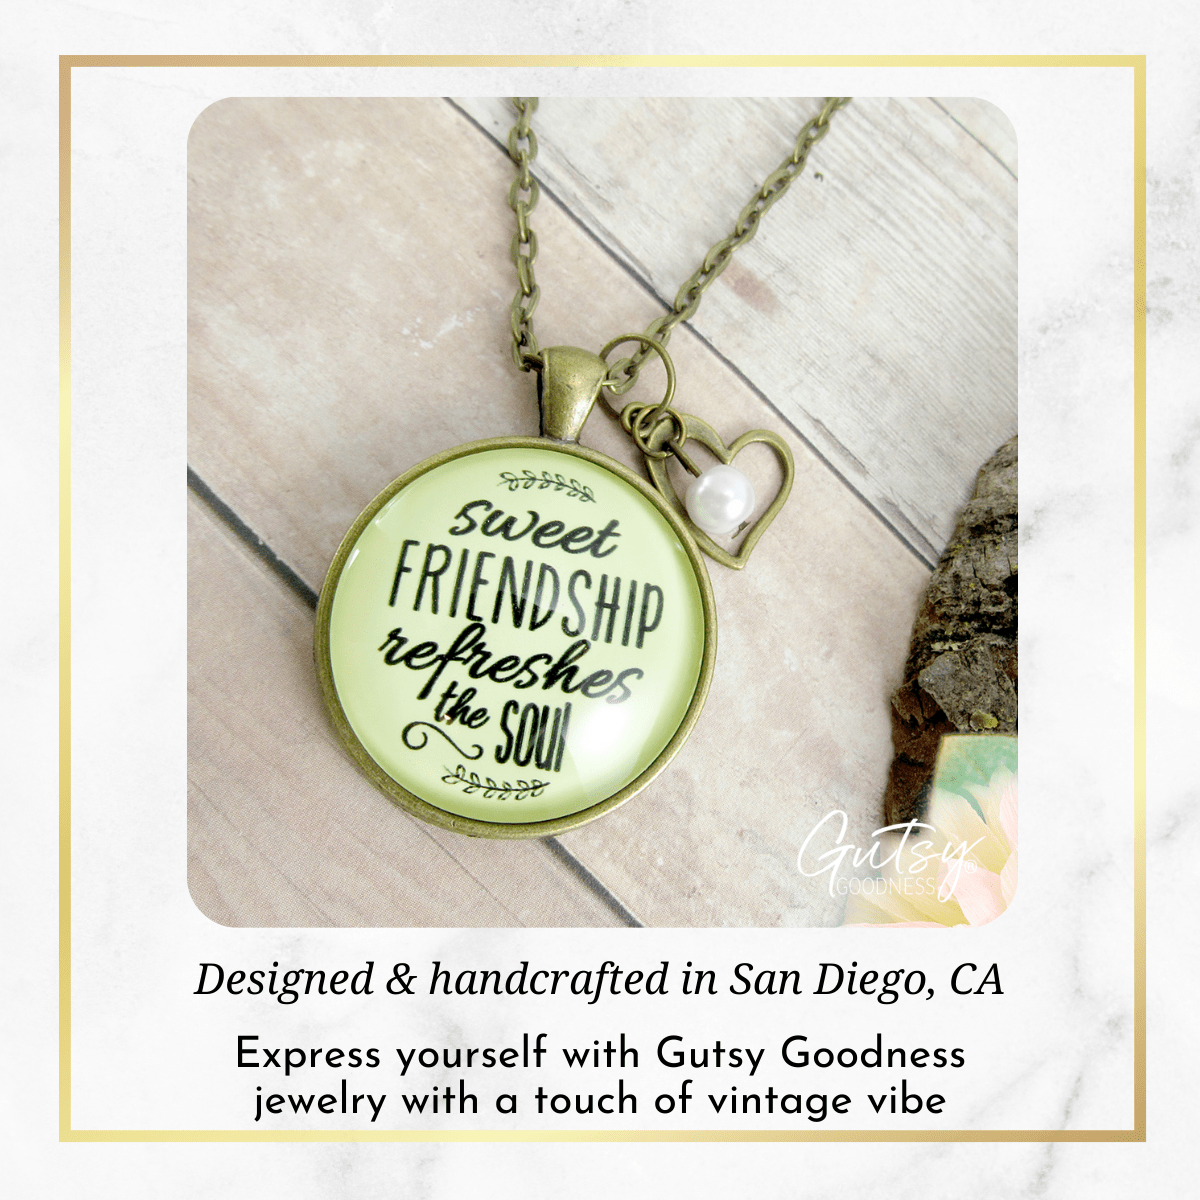 Gutsy Goodness BFF Necklace Sweet Friendship Refreshes Soul Inspirational Pendant Jewelry - Gutsy Goodness;Bff Necklace Sweet Friendship Refreshes Soul Inspirational Pendant Jewelry - Gutsy Goodness Handmade Jewelry Gifts